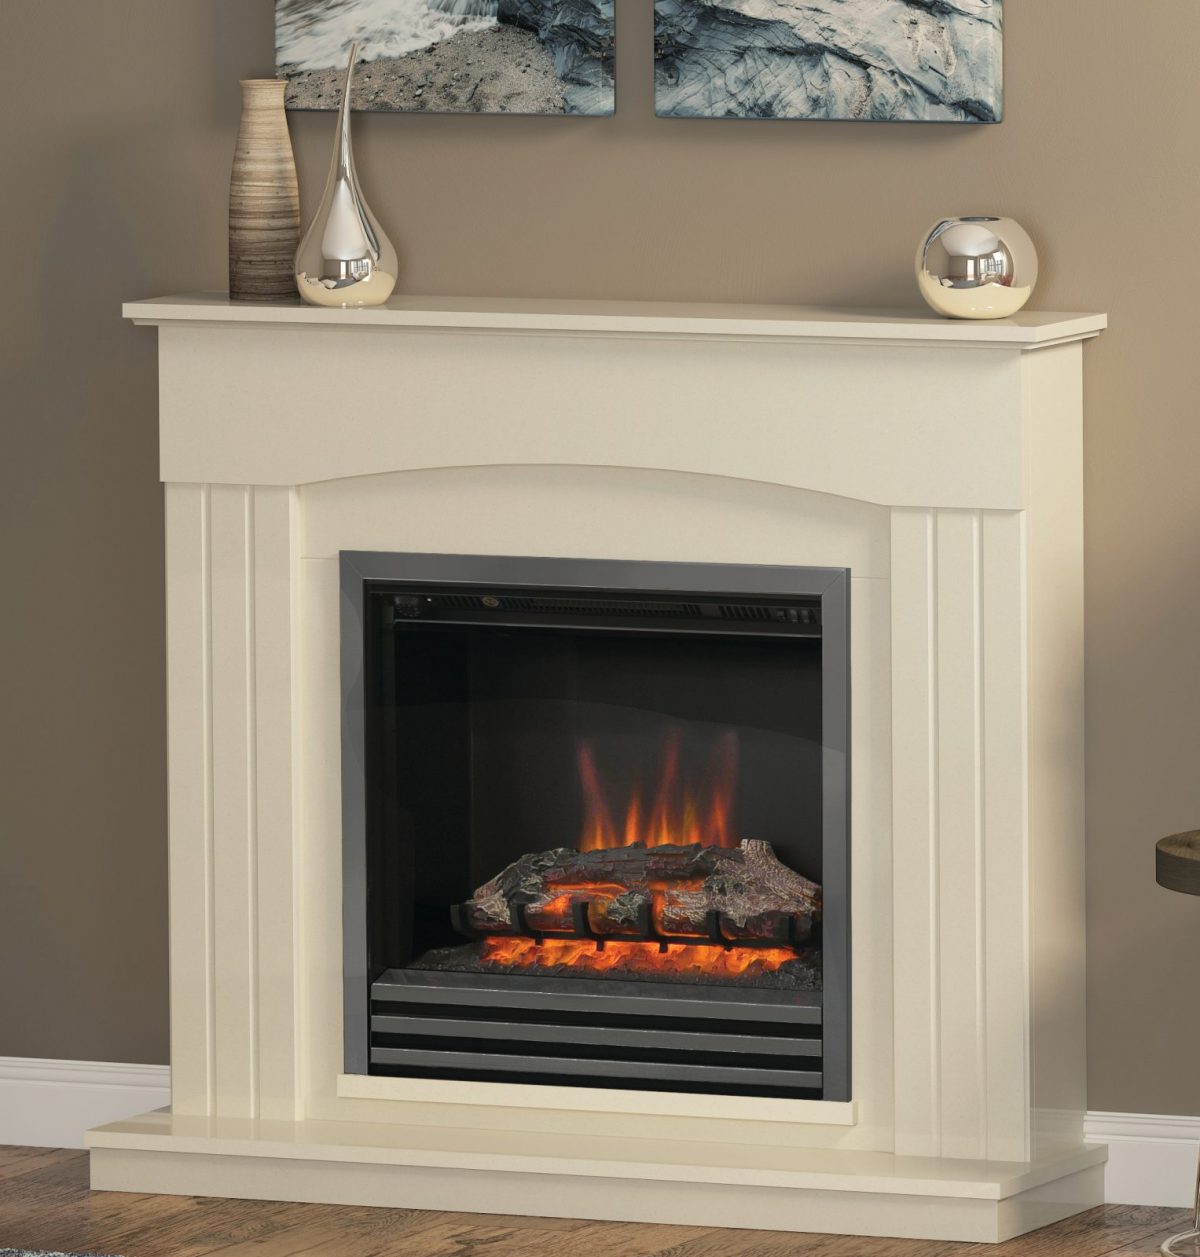 44″ Linmere fireplace in Almond Stone effect with Chrome Finish Electric Fire